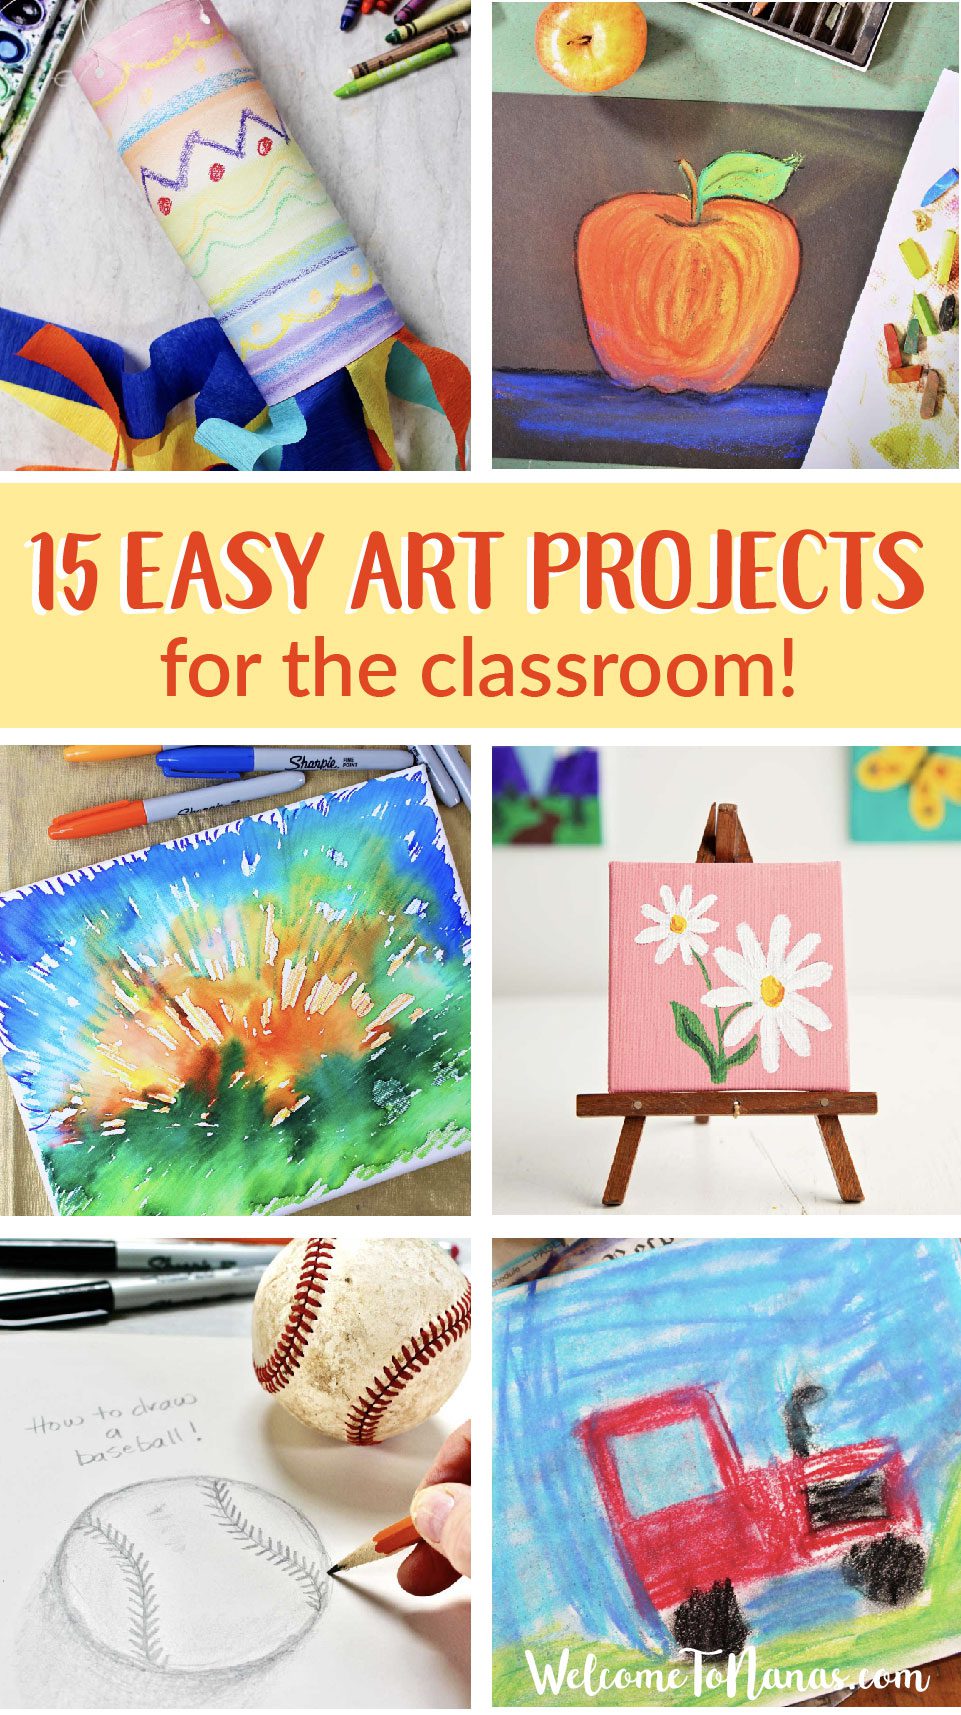 900+ Best Art and Crafts for Kids ideas  crafts for kids, crafts, arts and crafts  for kids